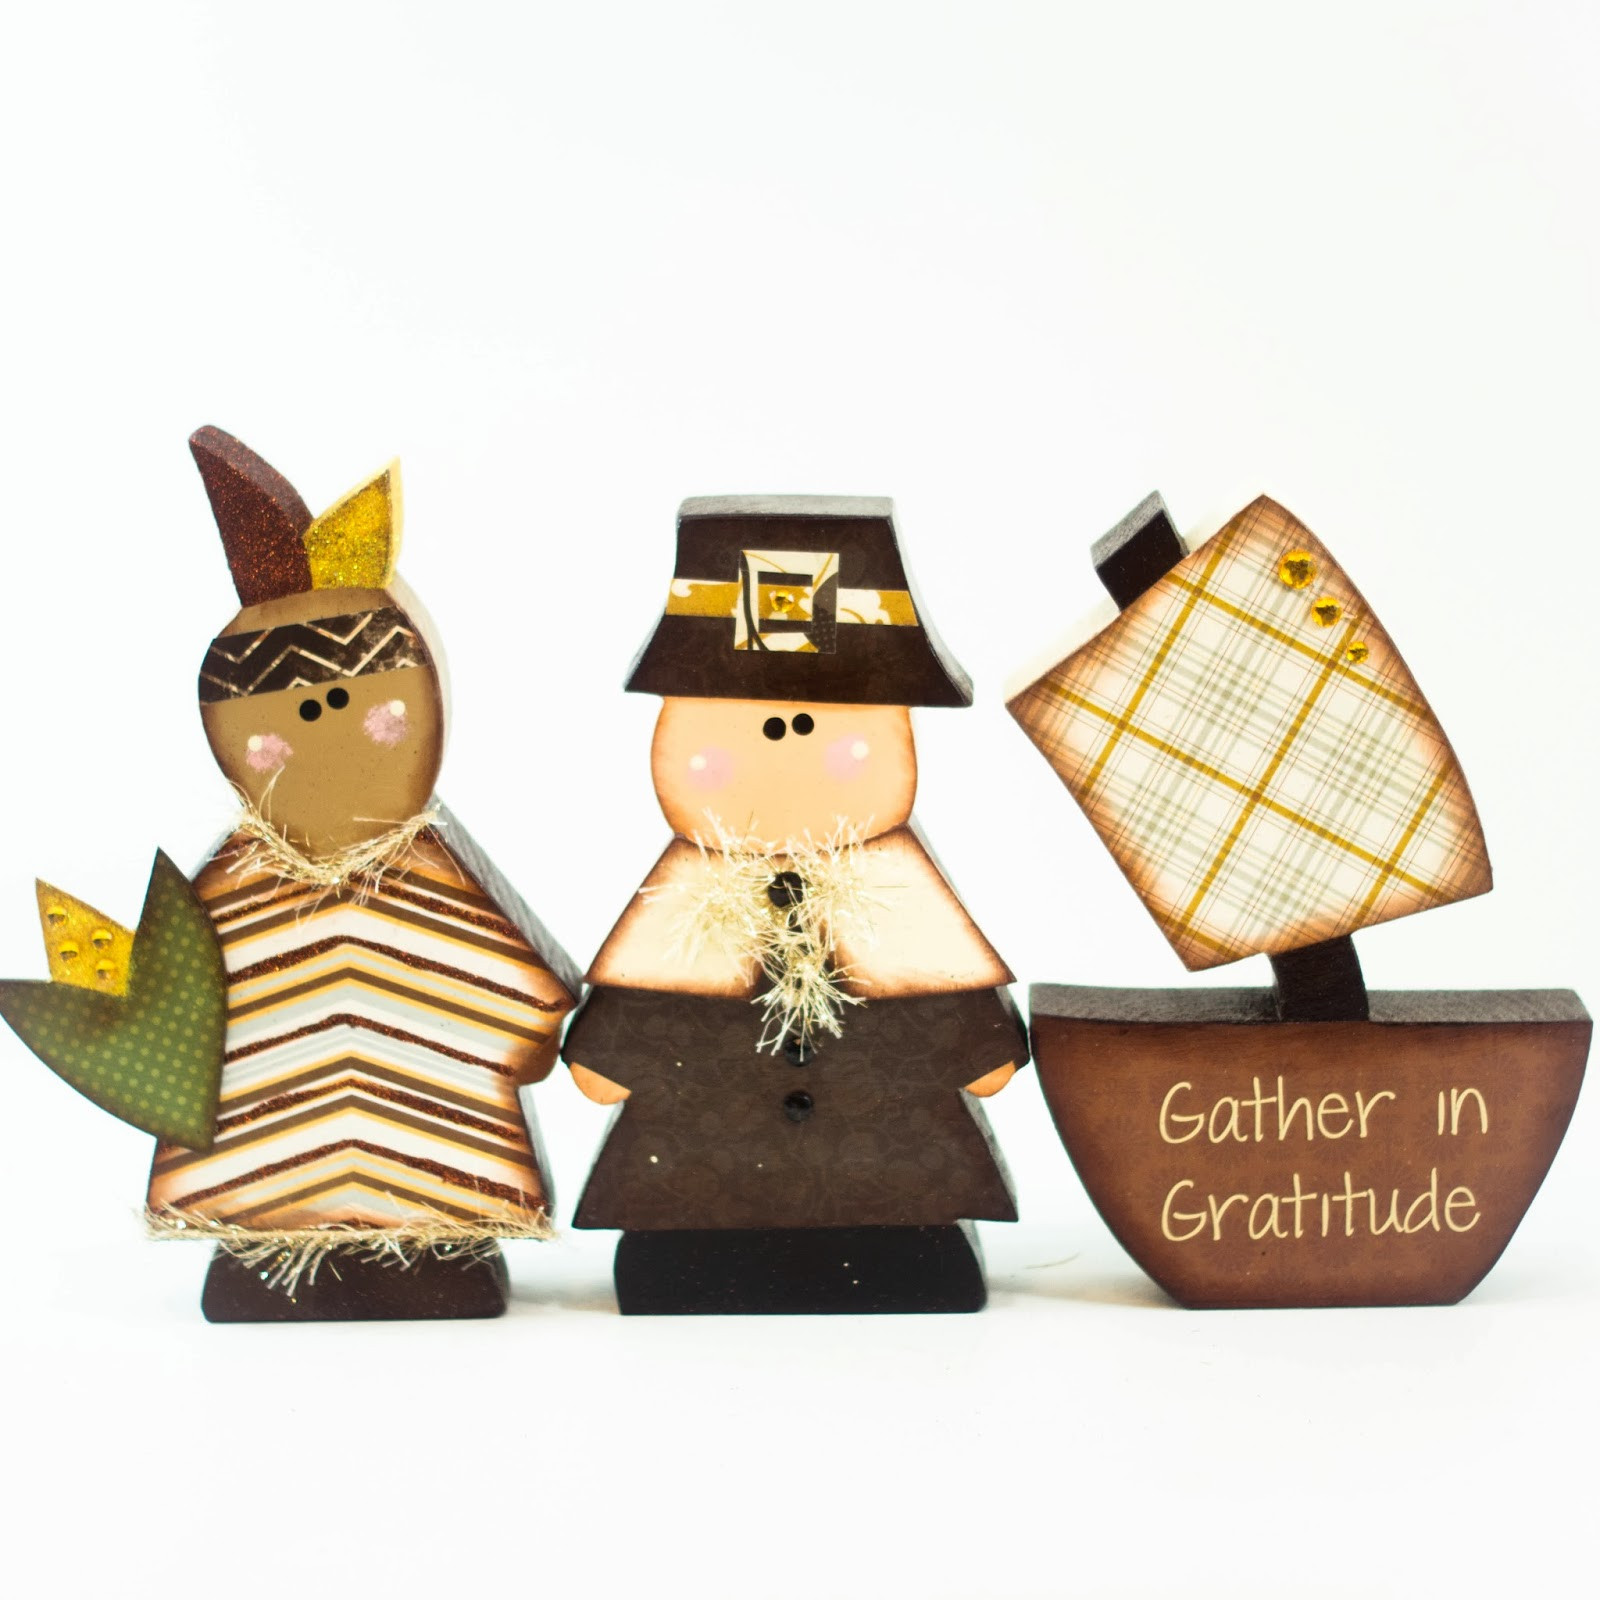 Thanksgiving Wood Crafts
 WOOD Creations Thanksgiving Crafts are Here